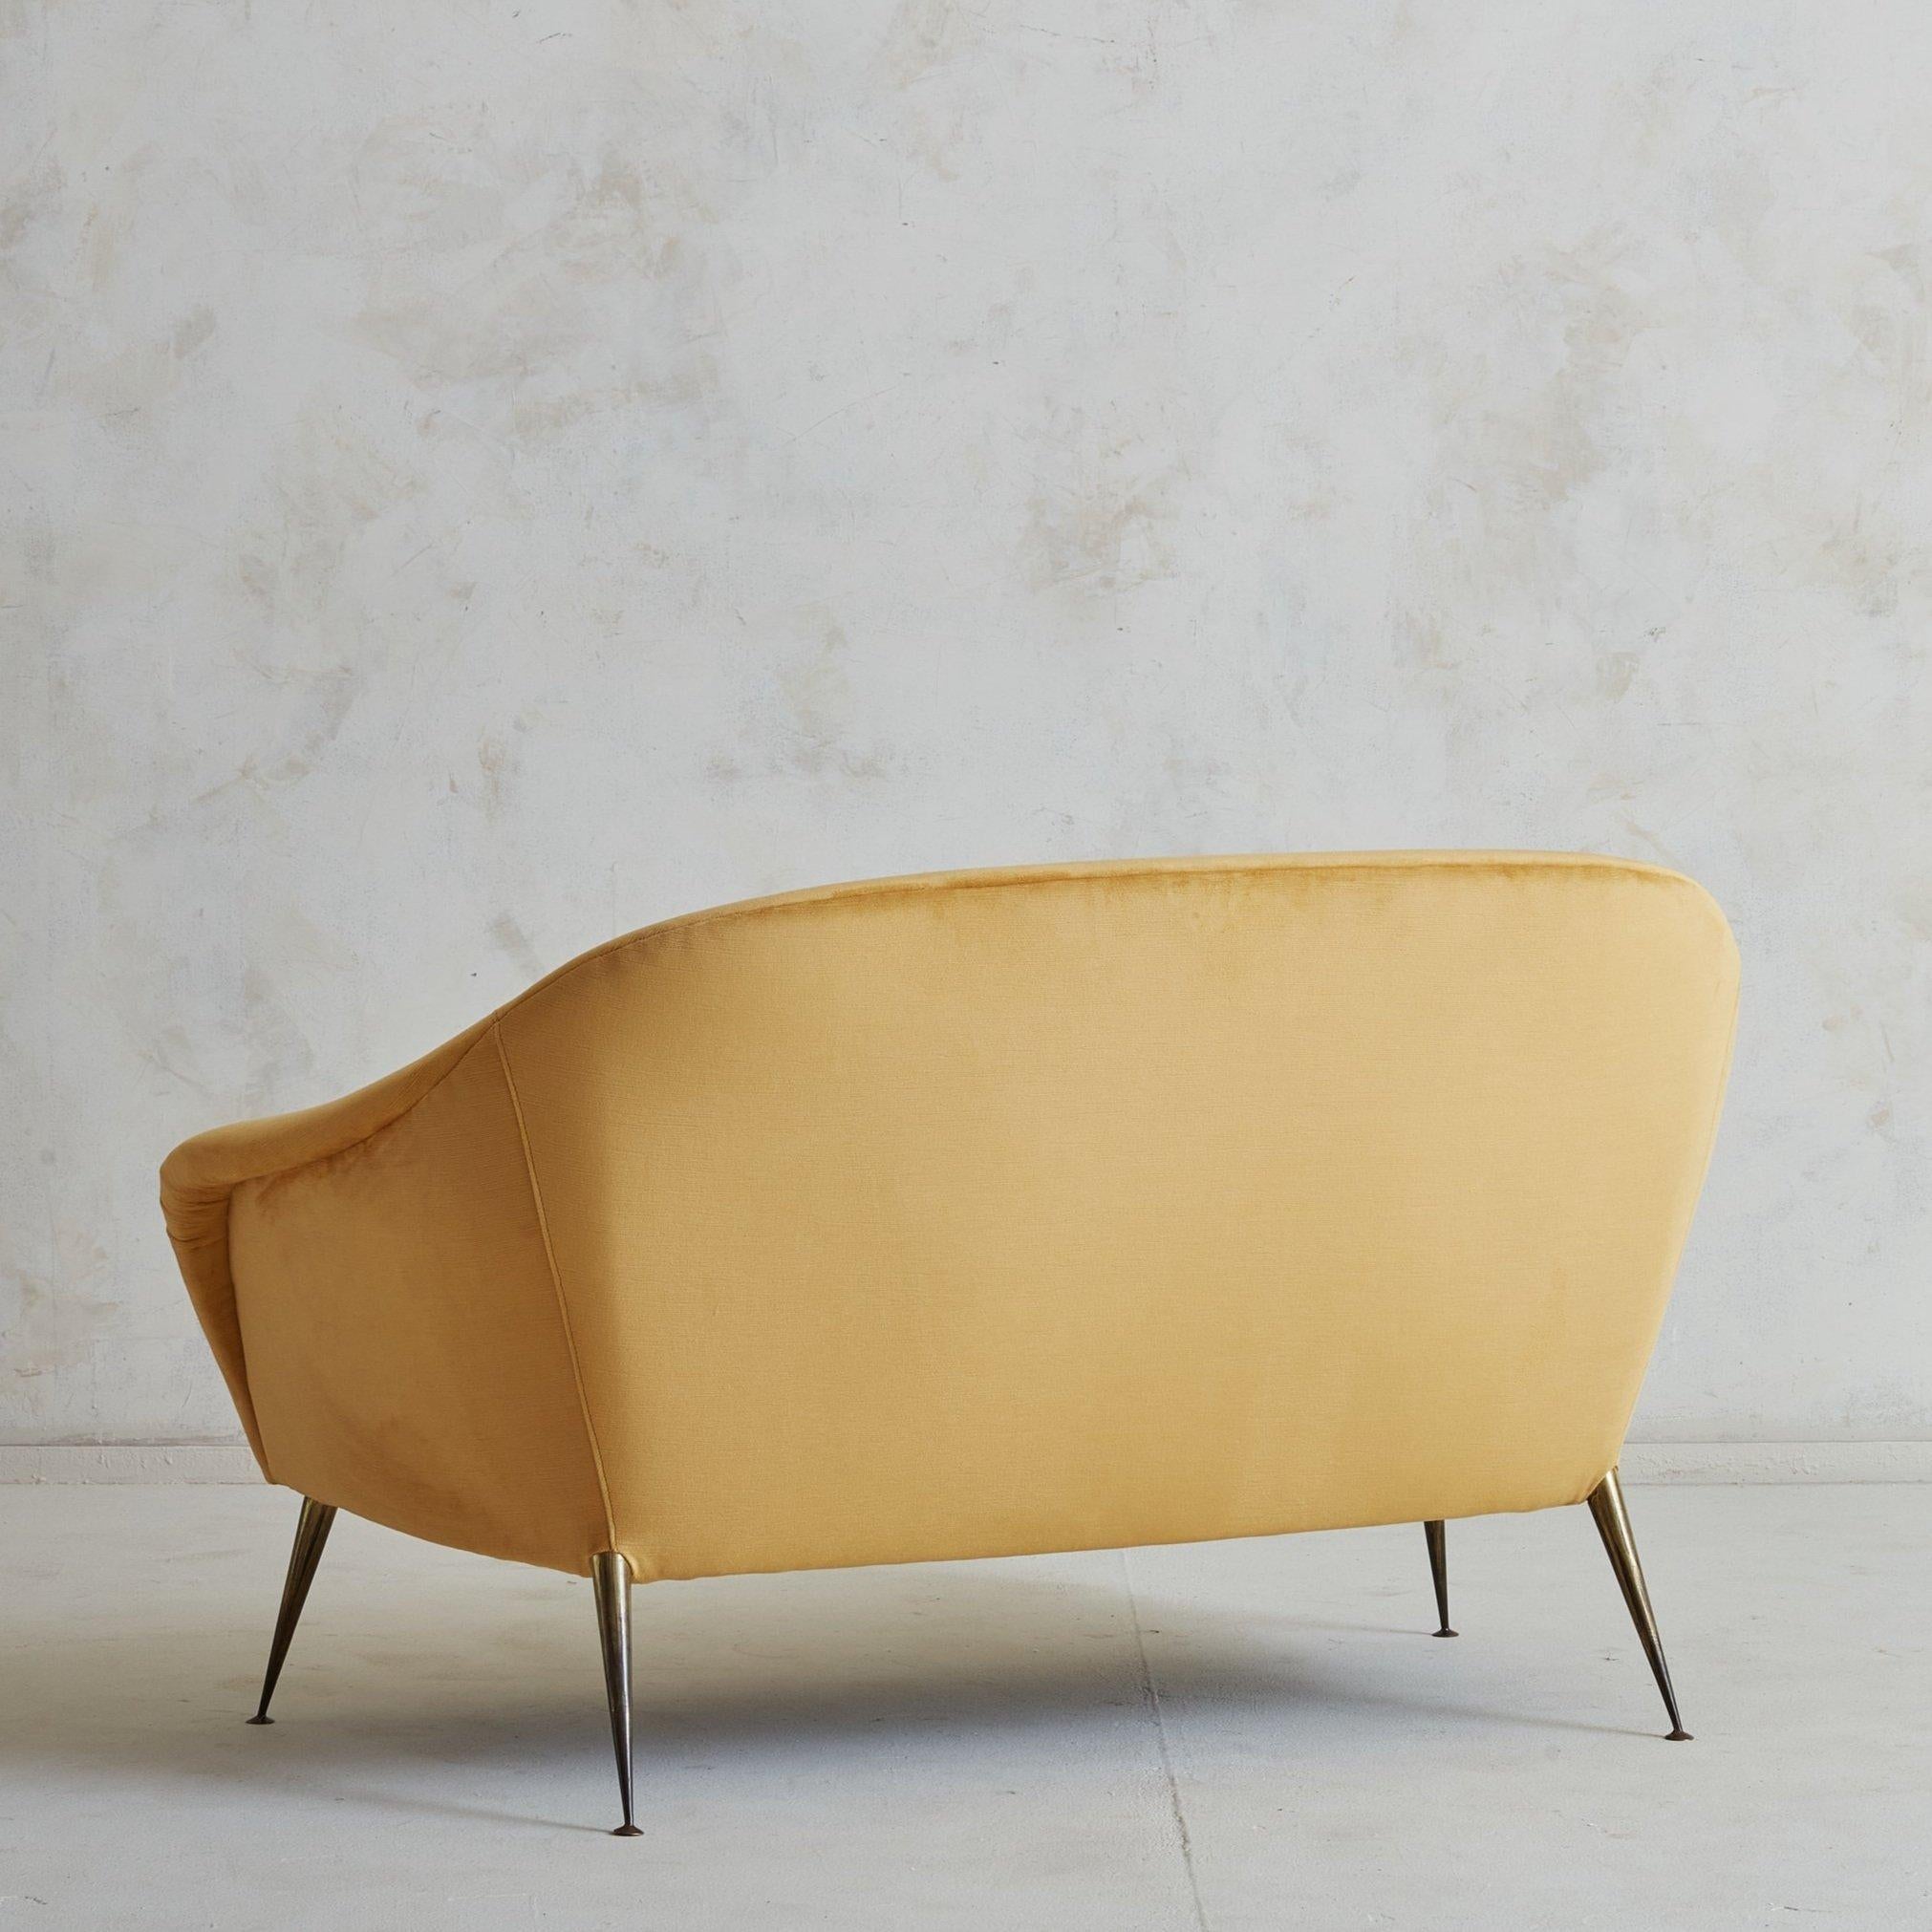 A 1960s Italian Loveseat in a shape often attributed to the works of Gio Ponti. Featuring an elegant curved, four splayed legs and new velvet upholstery. 
 

DIMENSIONS: 49.5 